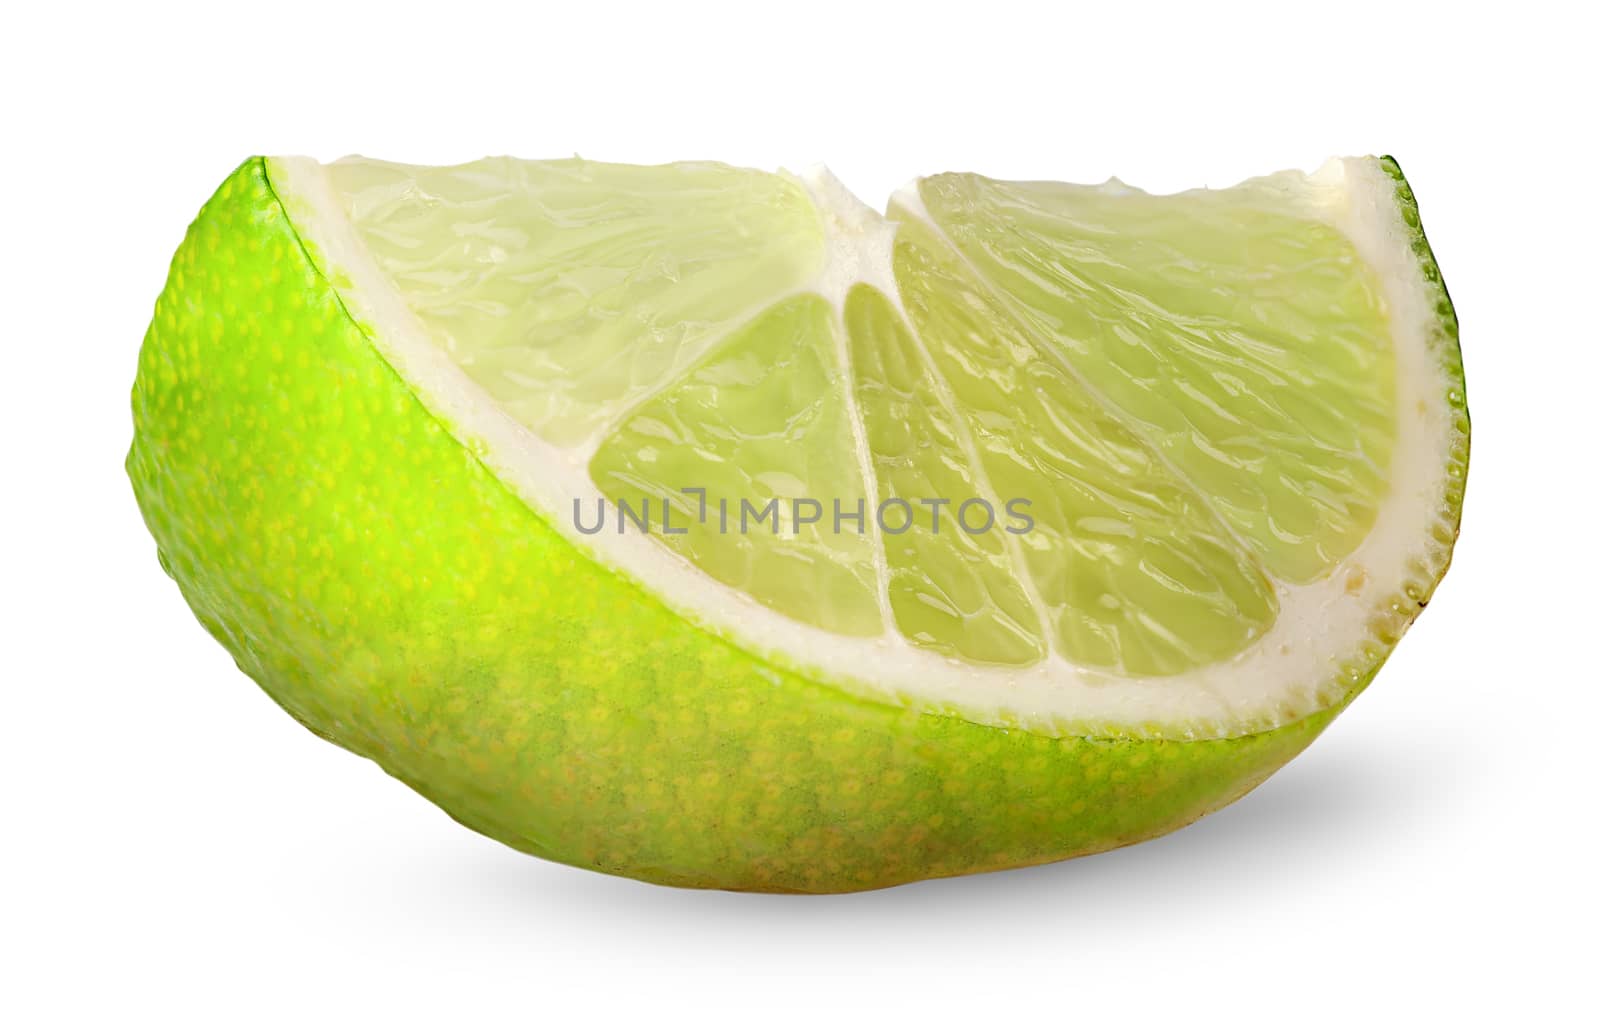 Small piece of lime isolated on white background